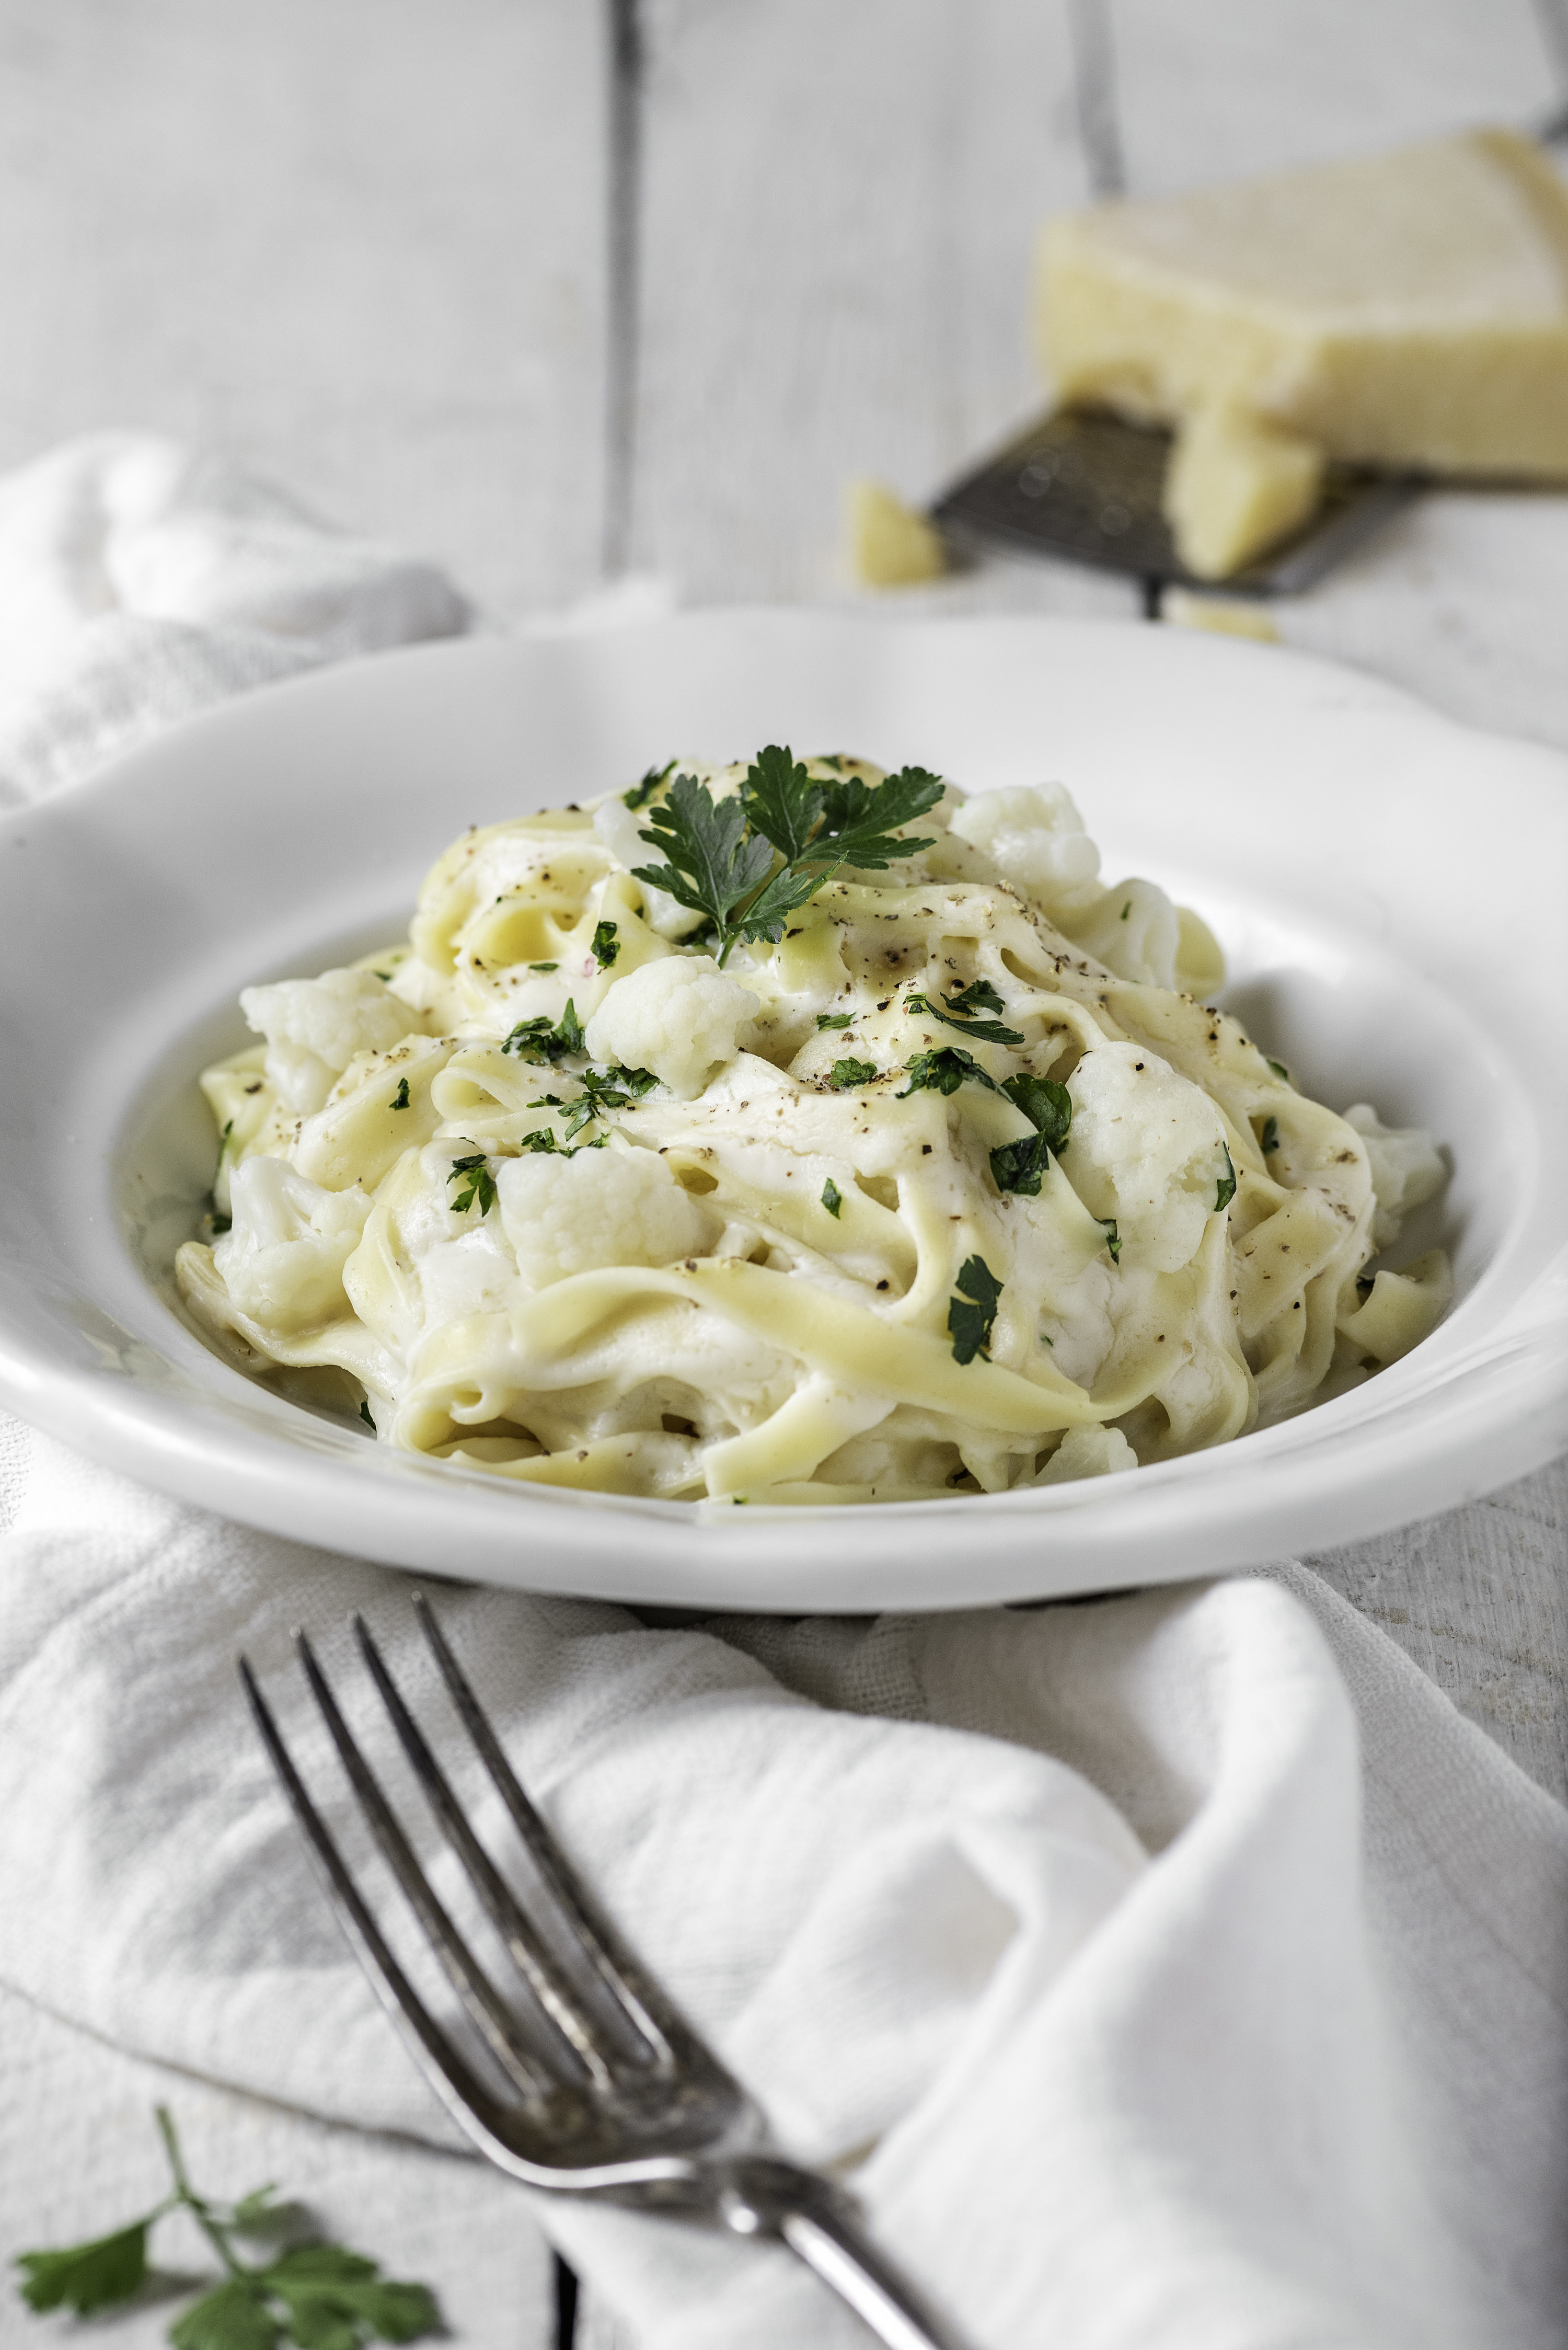 Bowl of creamy pasta with parsley liberally sprinkled on top.